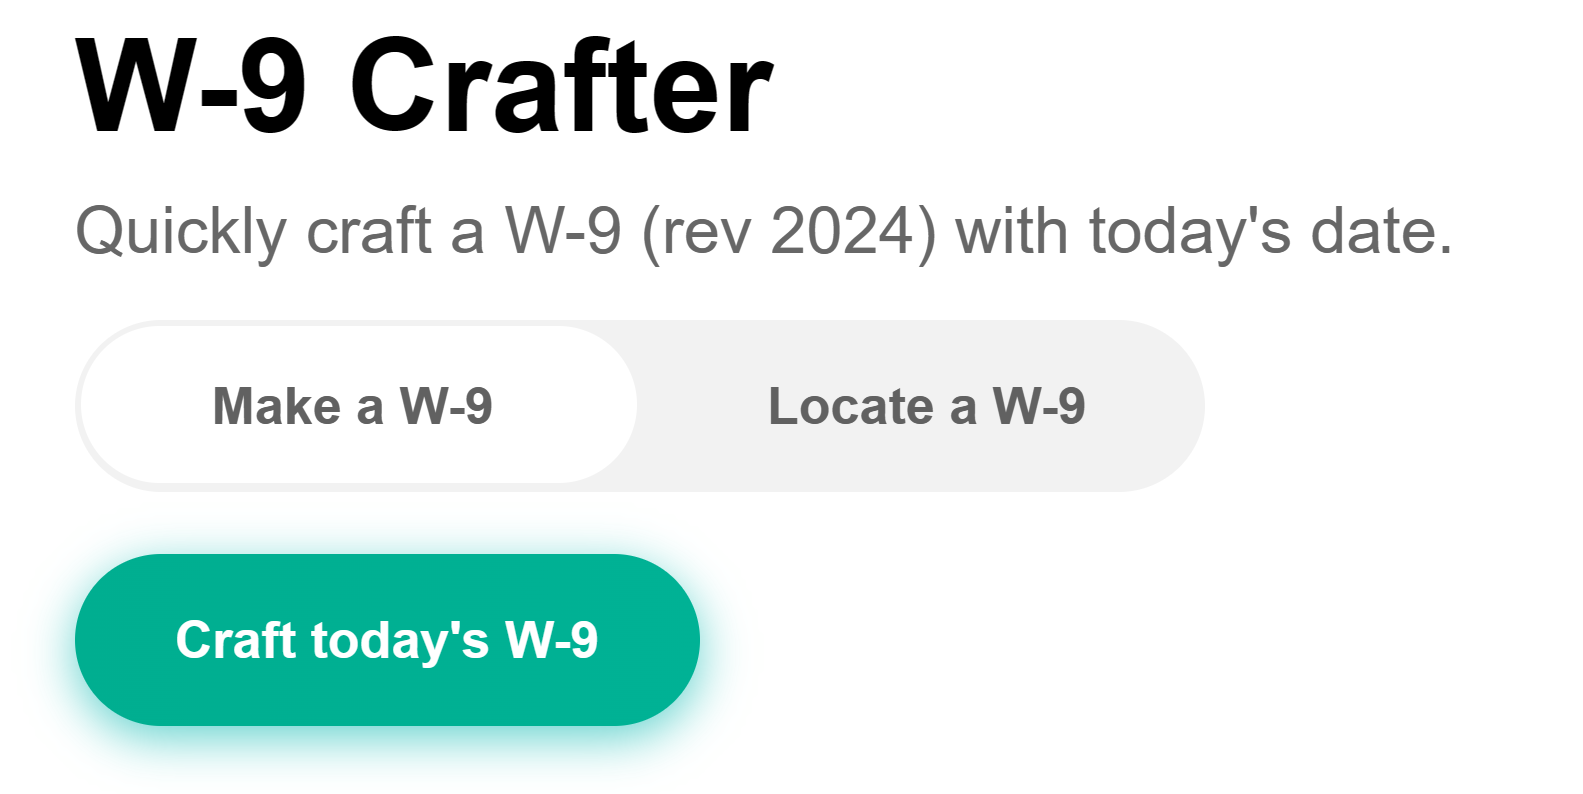 W-9 Crafter initial web app